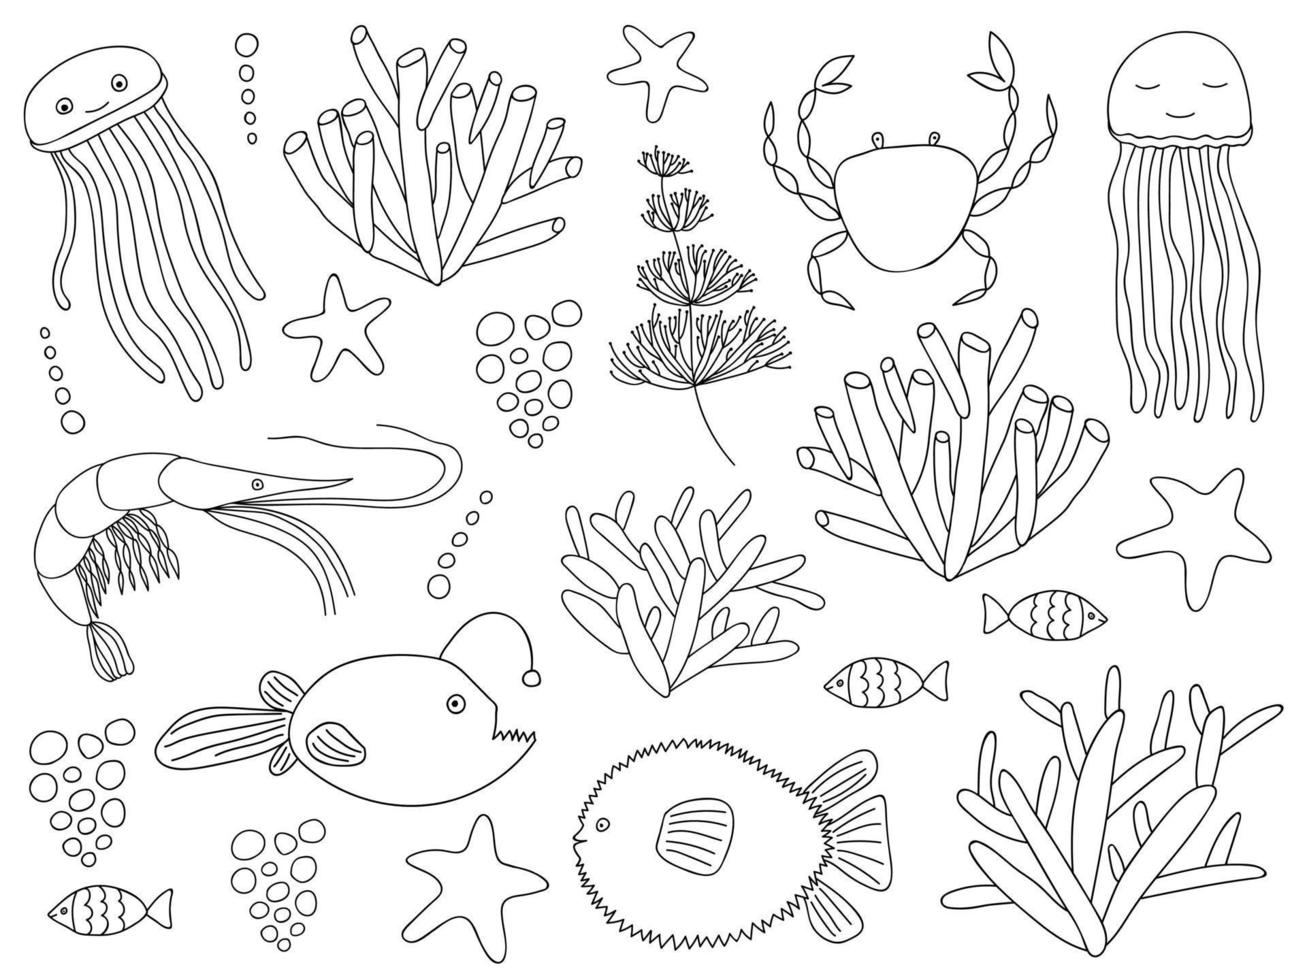 Big doodle sea elements set. Ocean, sea life animal and plant set. Vector underwater objects. Jellyfish, ball fish, reef fish, shrimp, crab, anglerfish, coral, seaweed, seagrass, starfish.